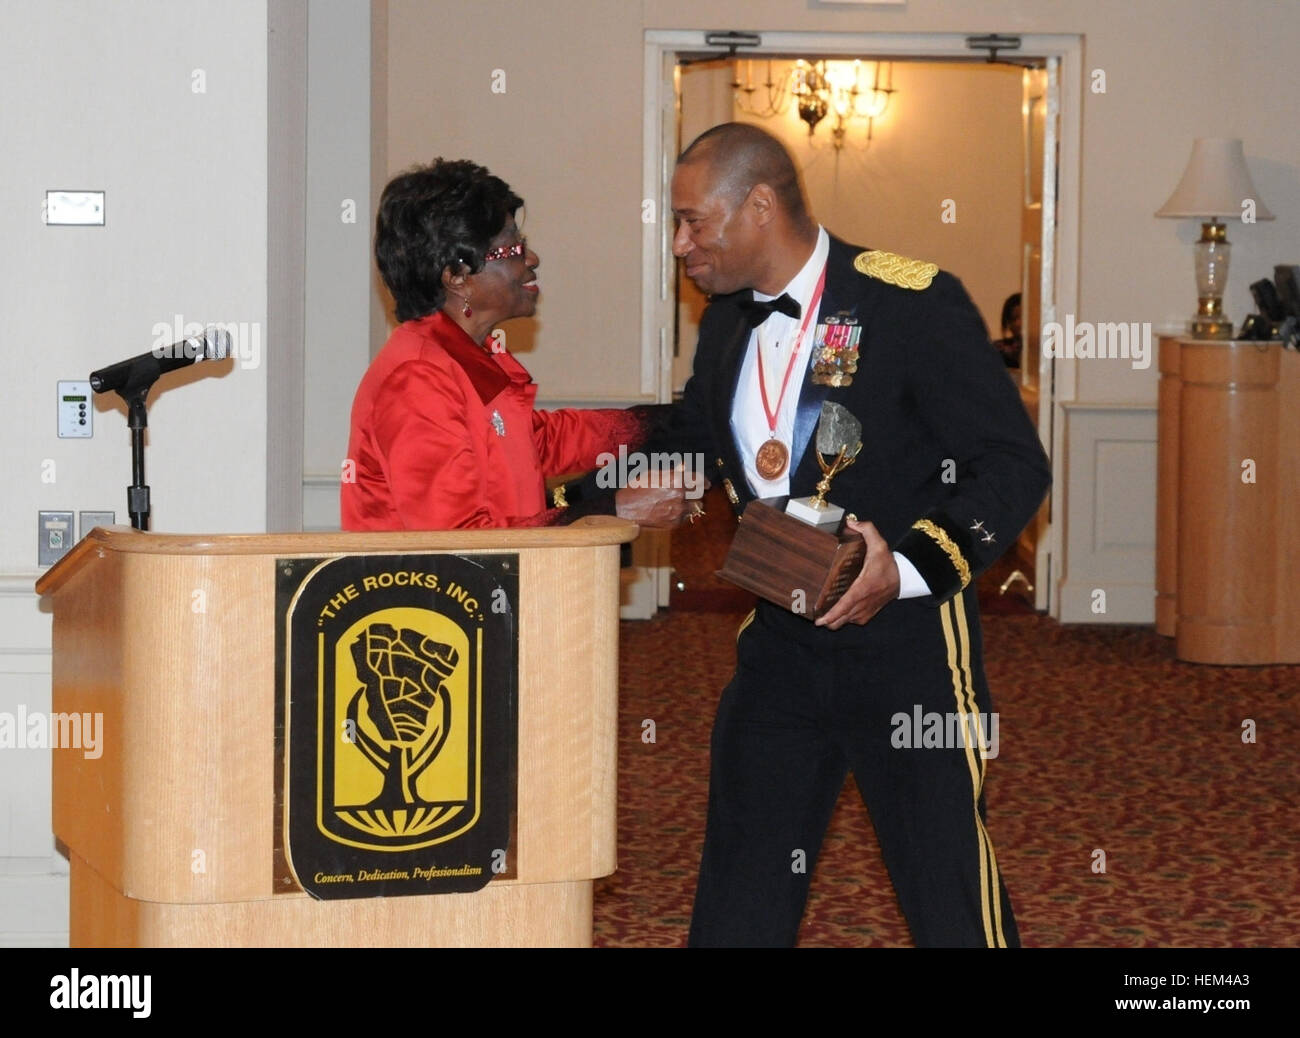 Maj. Gen. Dana J.H. Pittard, 1st Armored Division and Fort Bliss commanding general, receives the 'Rock of the Year' award from retired Brig. Gen Clara Adams-Ender at the 2012 Rocks Spring Formal. The Rocks, Inc. is a 501(c)3 organization whose mission is to mentor officers and cadets. The organization provides more than $30,000 in scholarships to cadets annually. 2012 Rocks National Leadership and Training Conference 120331-A-YZ907-001 Stock Photo